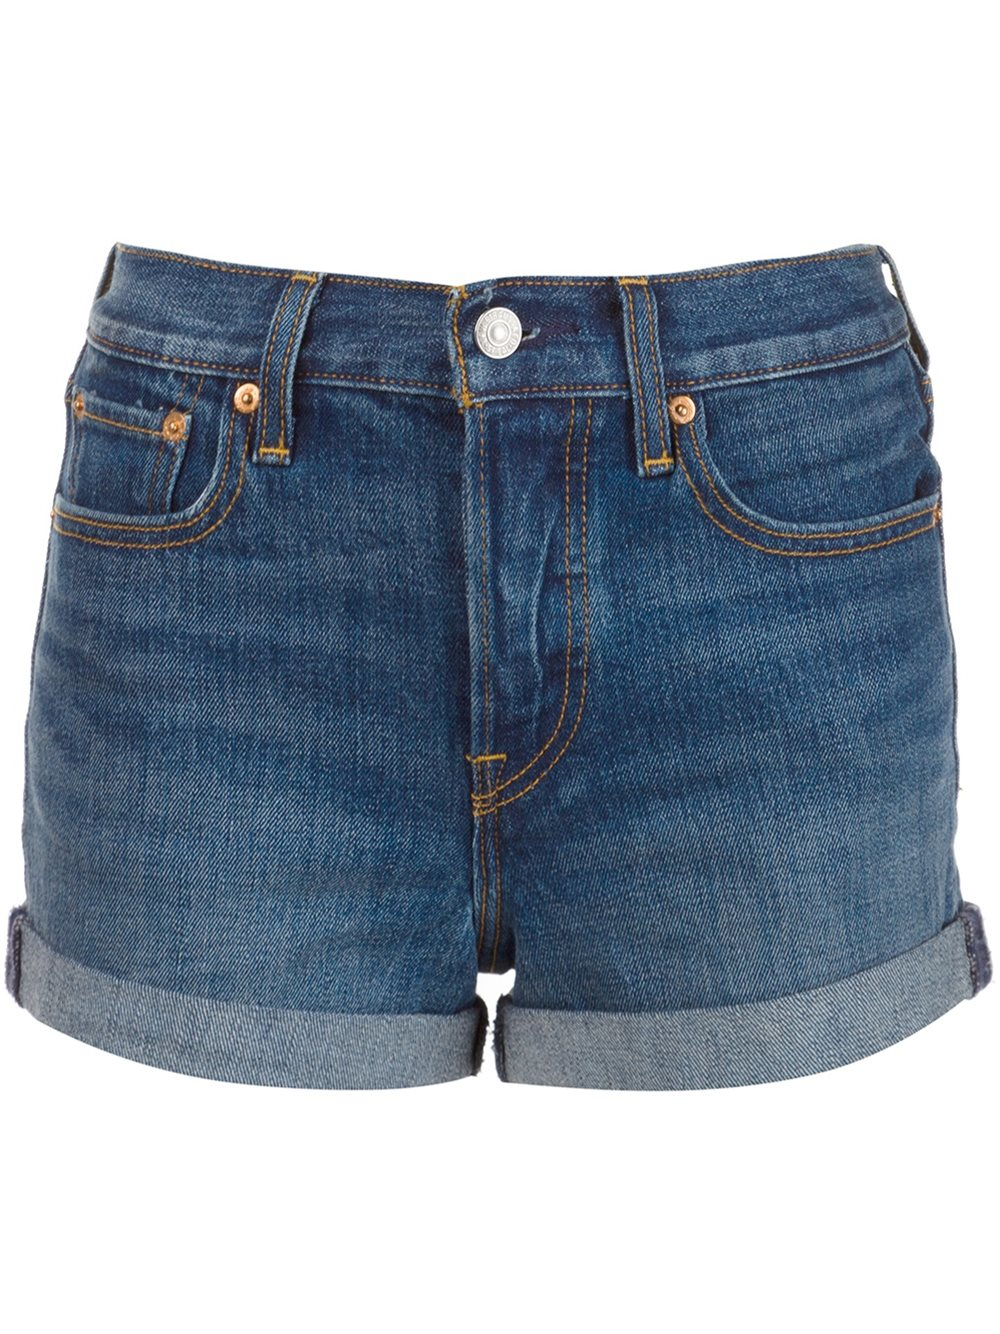 Levi's High Waisted Denim Shorts in Blue - Lyst